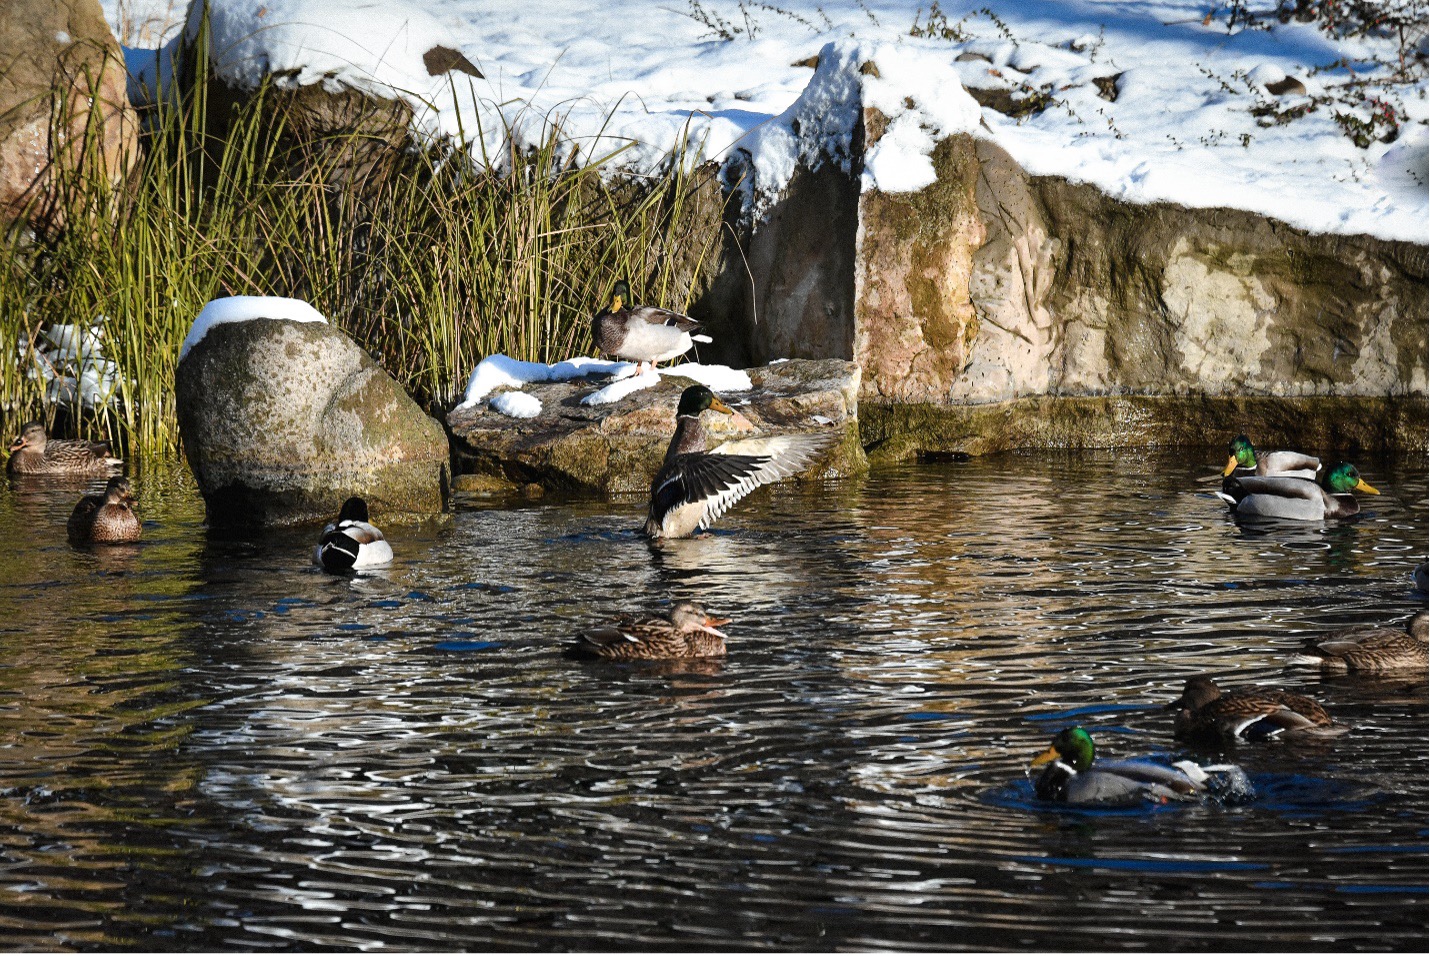 Mallard ducks swim and fly at a pond at the Kyiv City Zoo. These are wild waterfowl and not a zoo exhibit. Dec. 10 photo by Stefan Korshak.